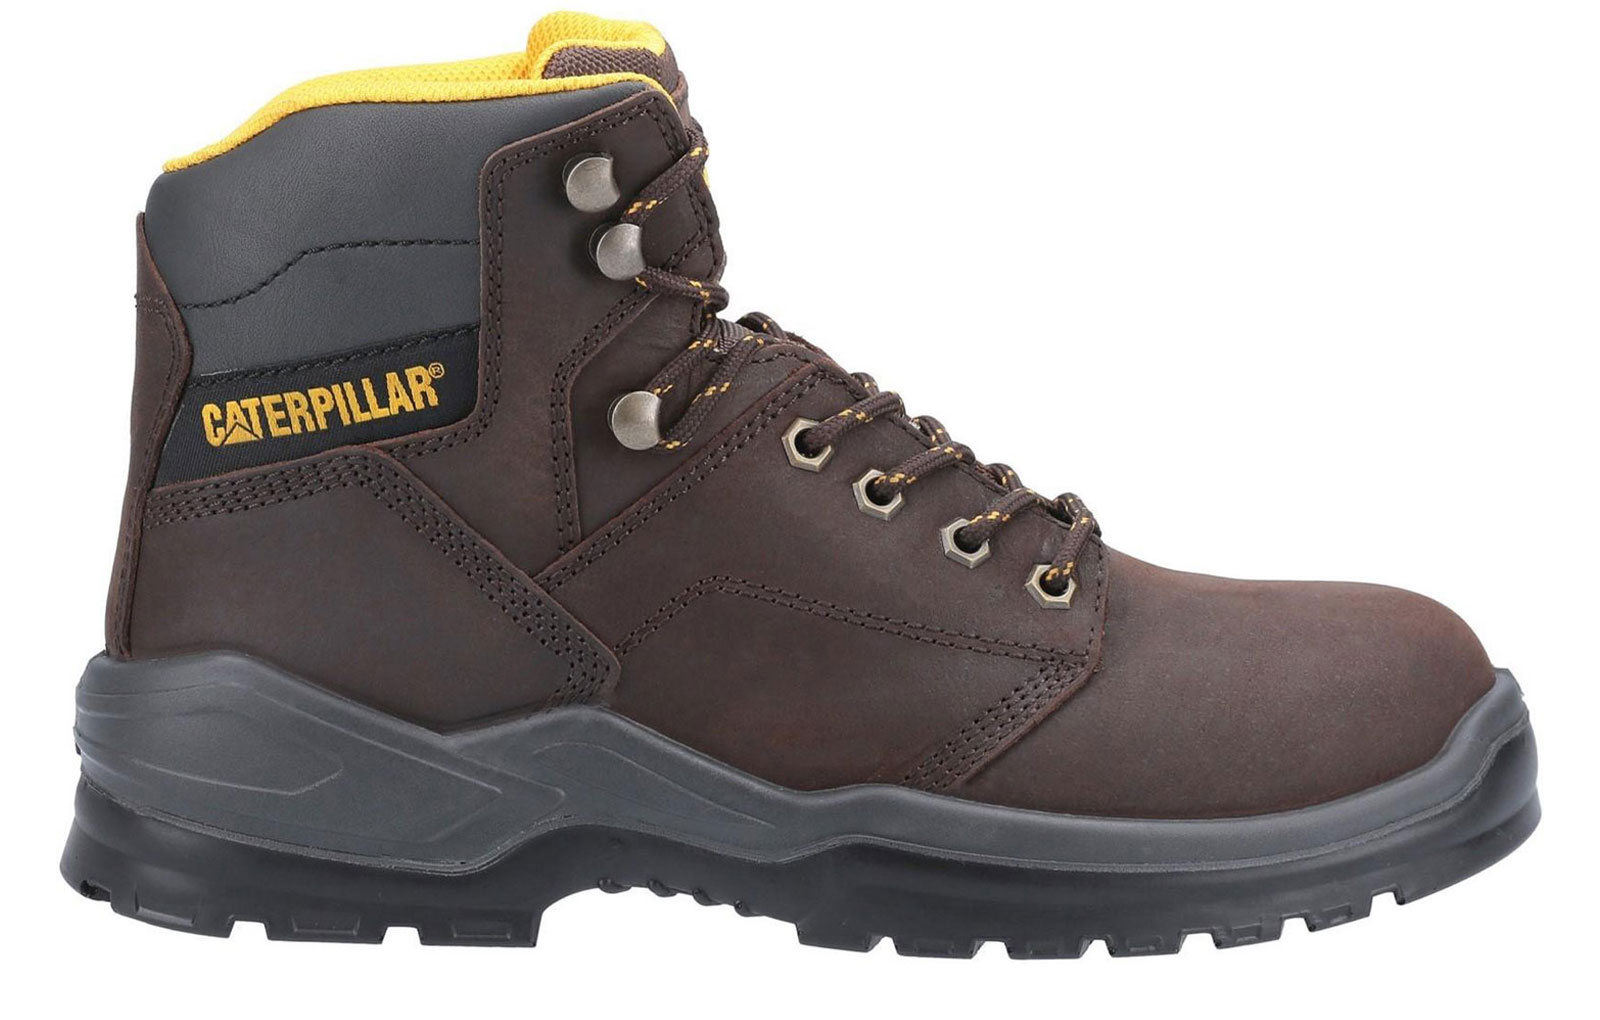 Caterpillar Striver Lace Up Injected Safety Boot Mens - GRD-30702-52447-03